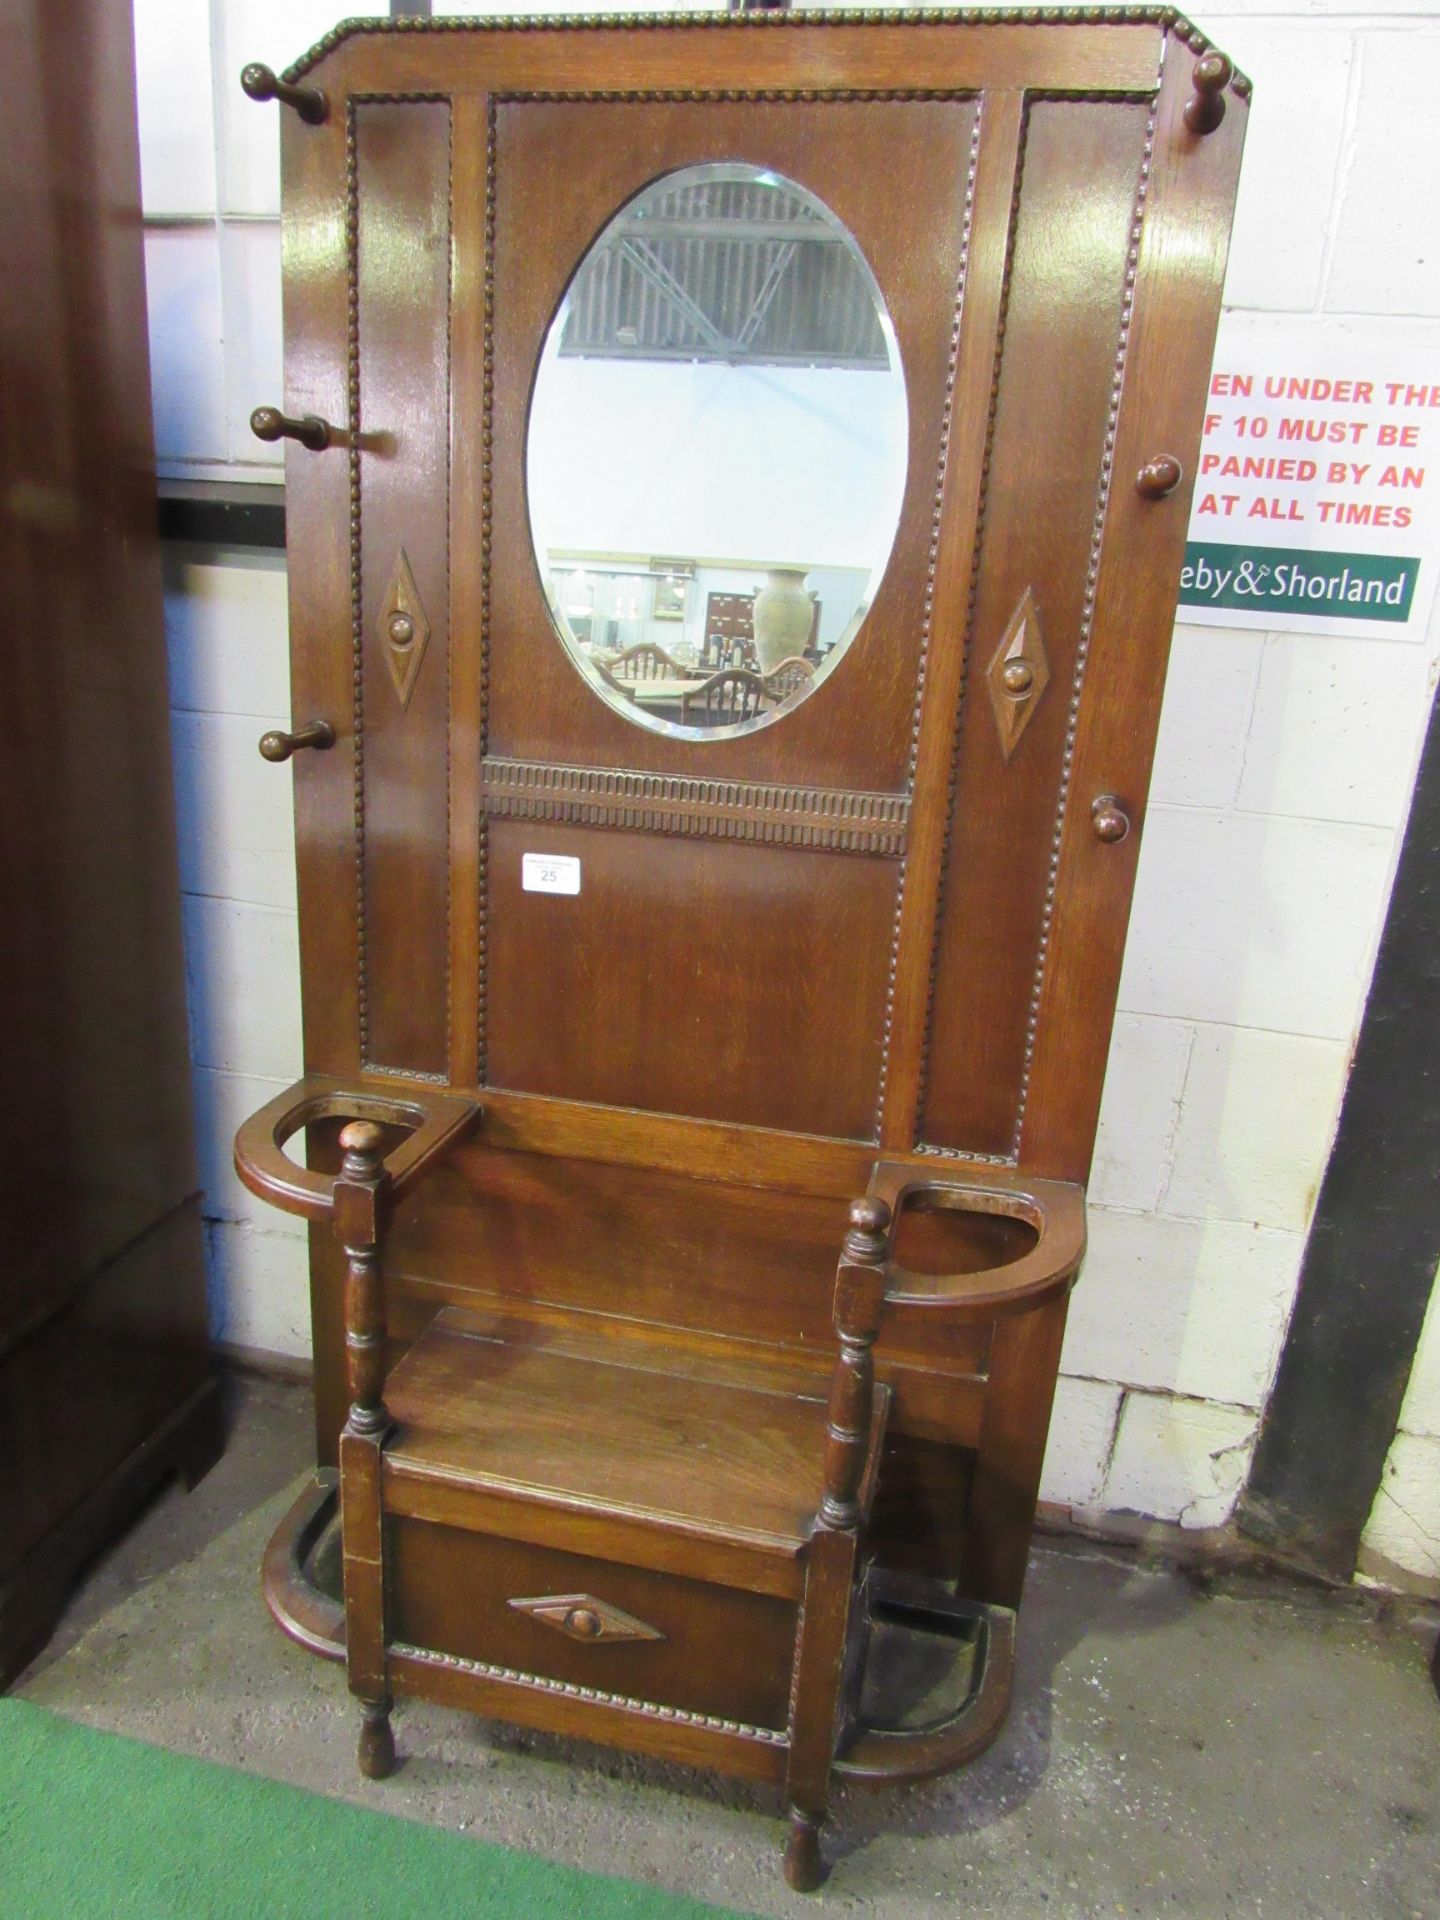 Oak mirror backed hall stand with integral box storage seat. Estimate £20-40.